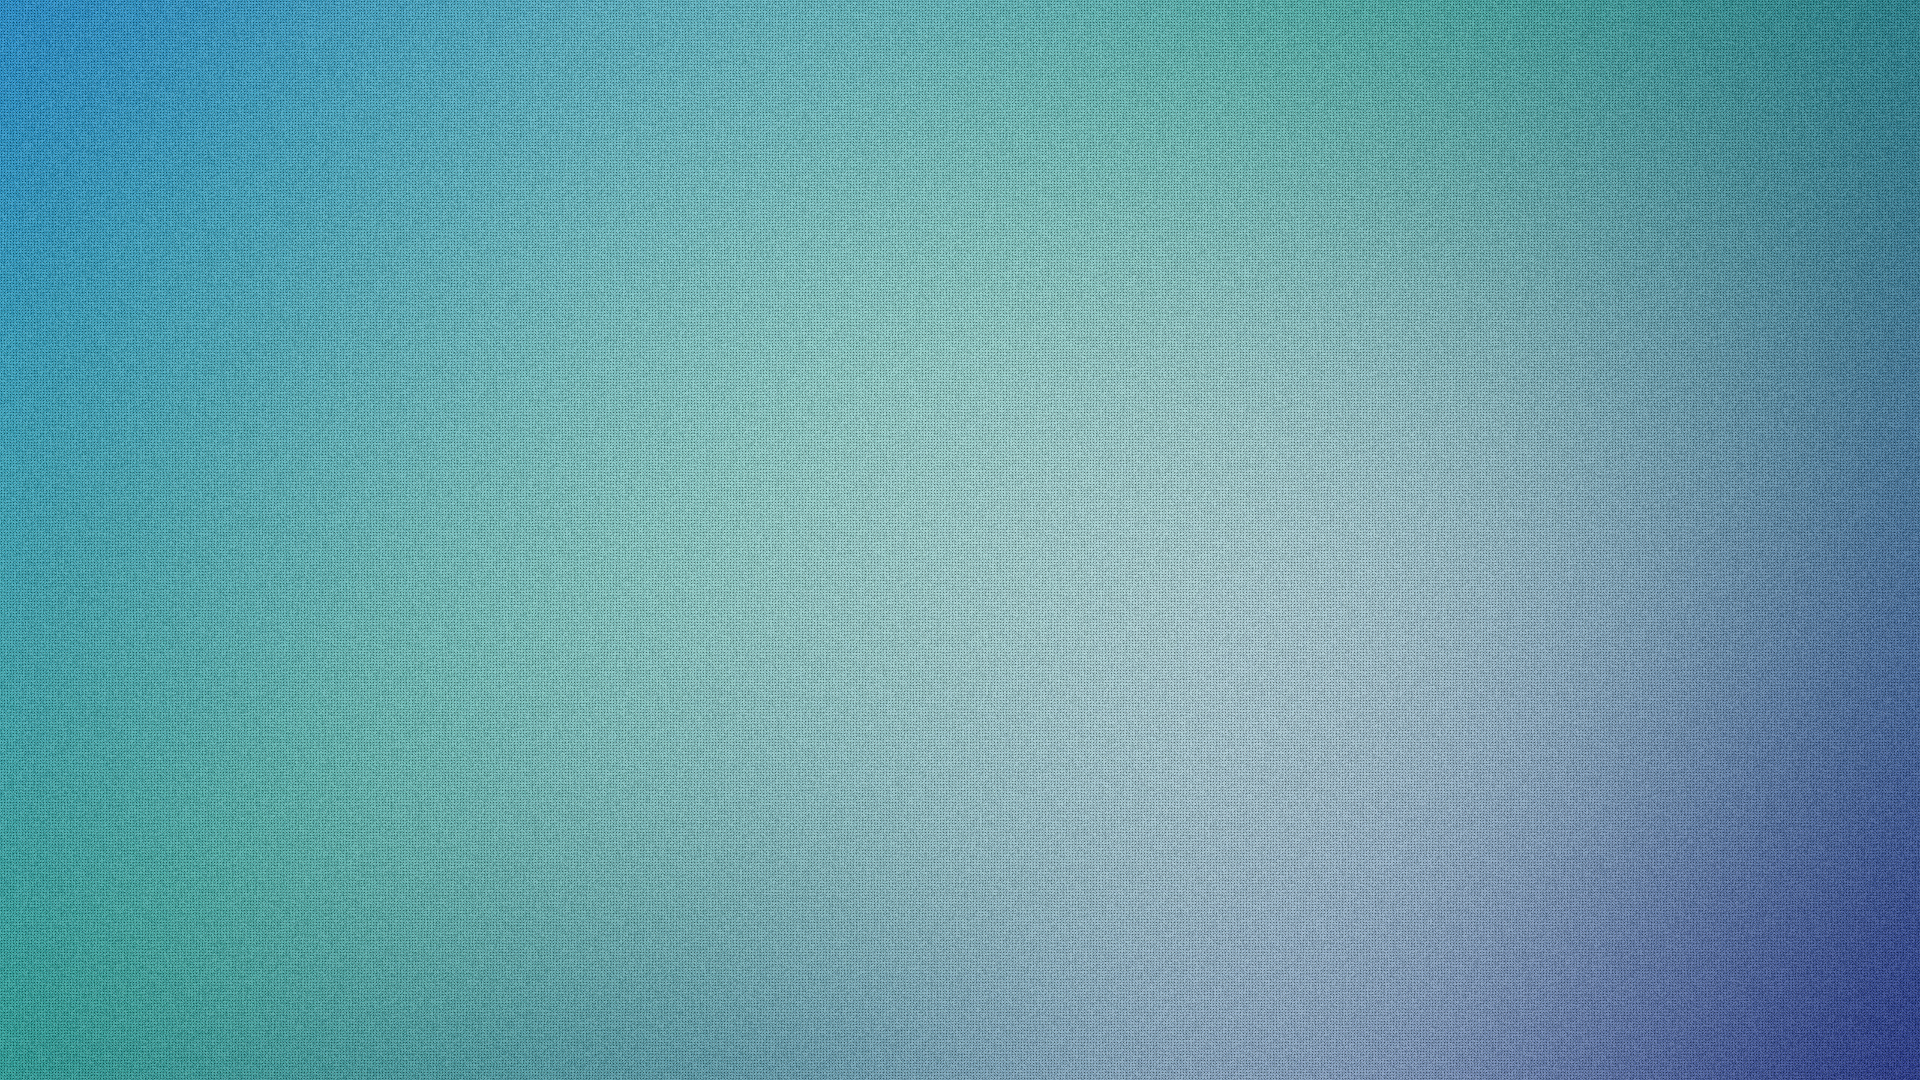 Abstract Turquoise HD Wallpaper | Background Image | 1920x1080